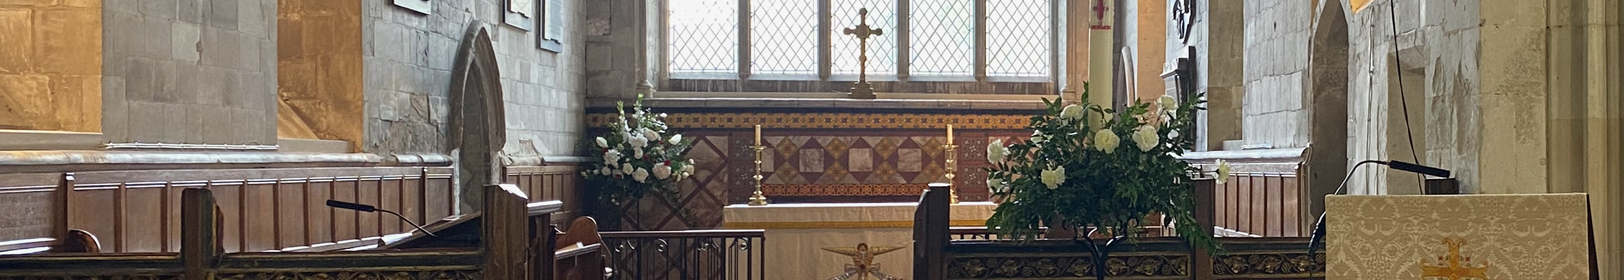 The interior of Trumpington church alter, pews and flower arrangements